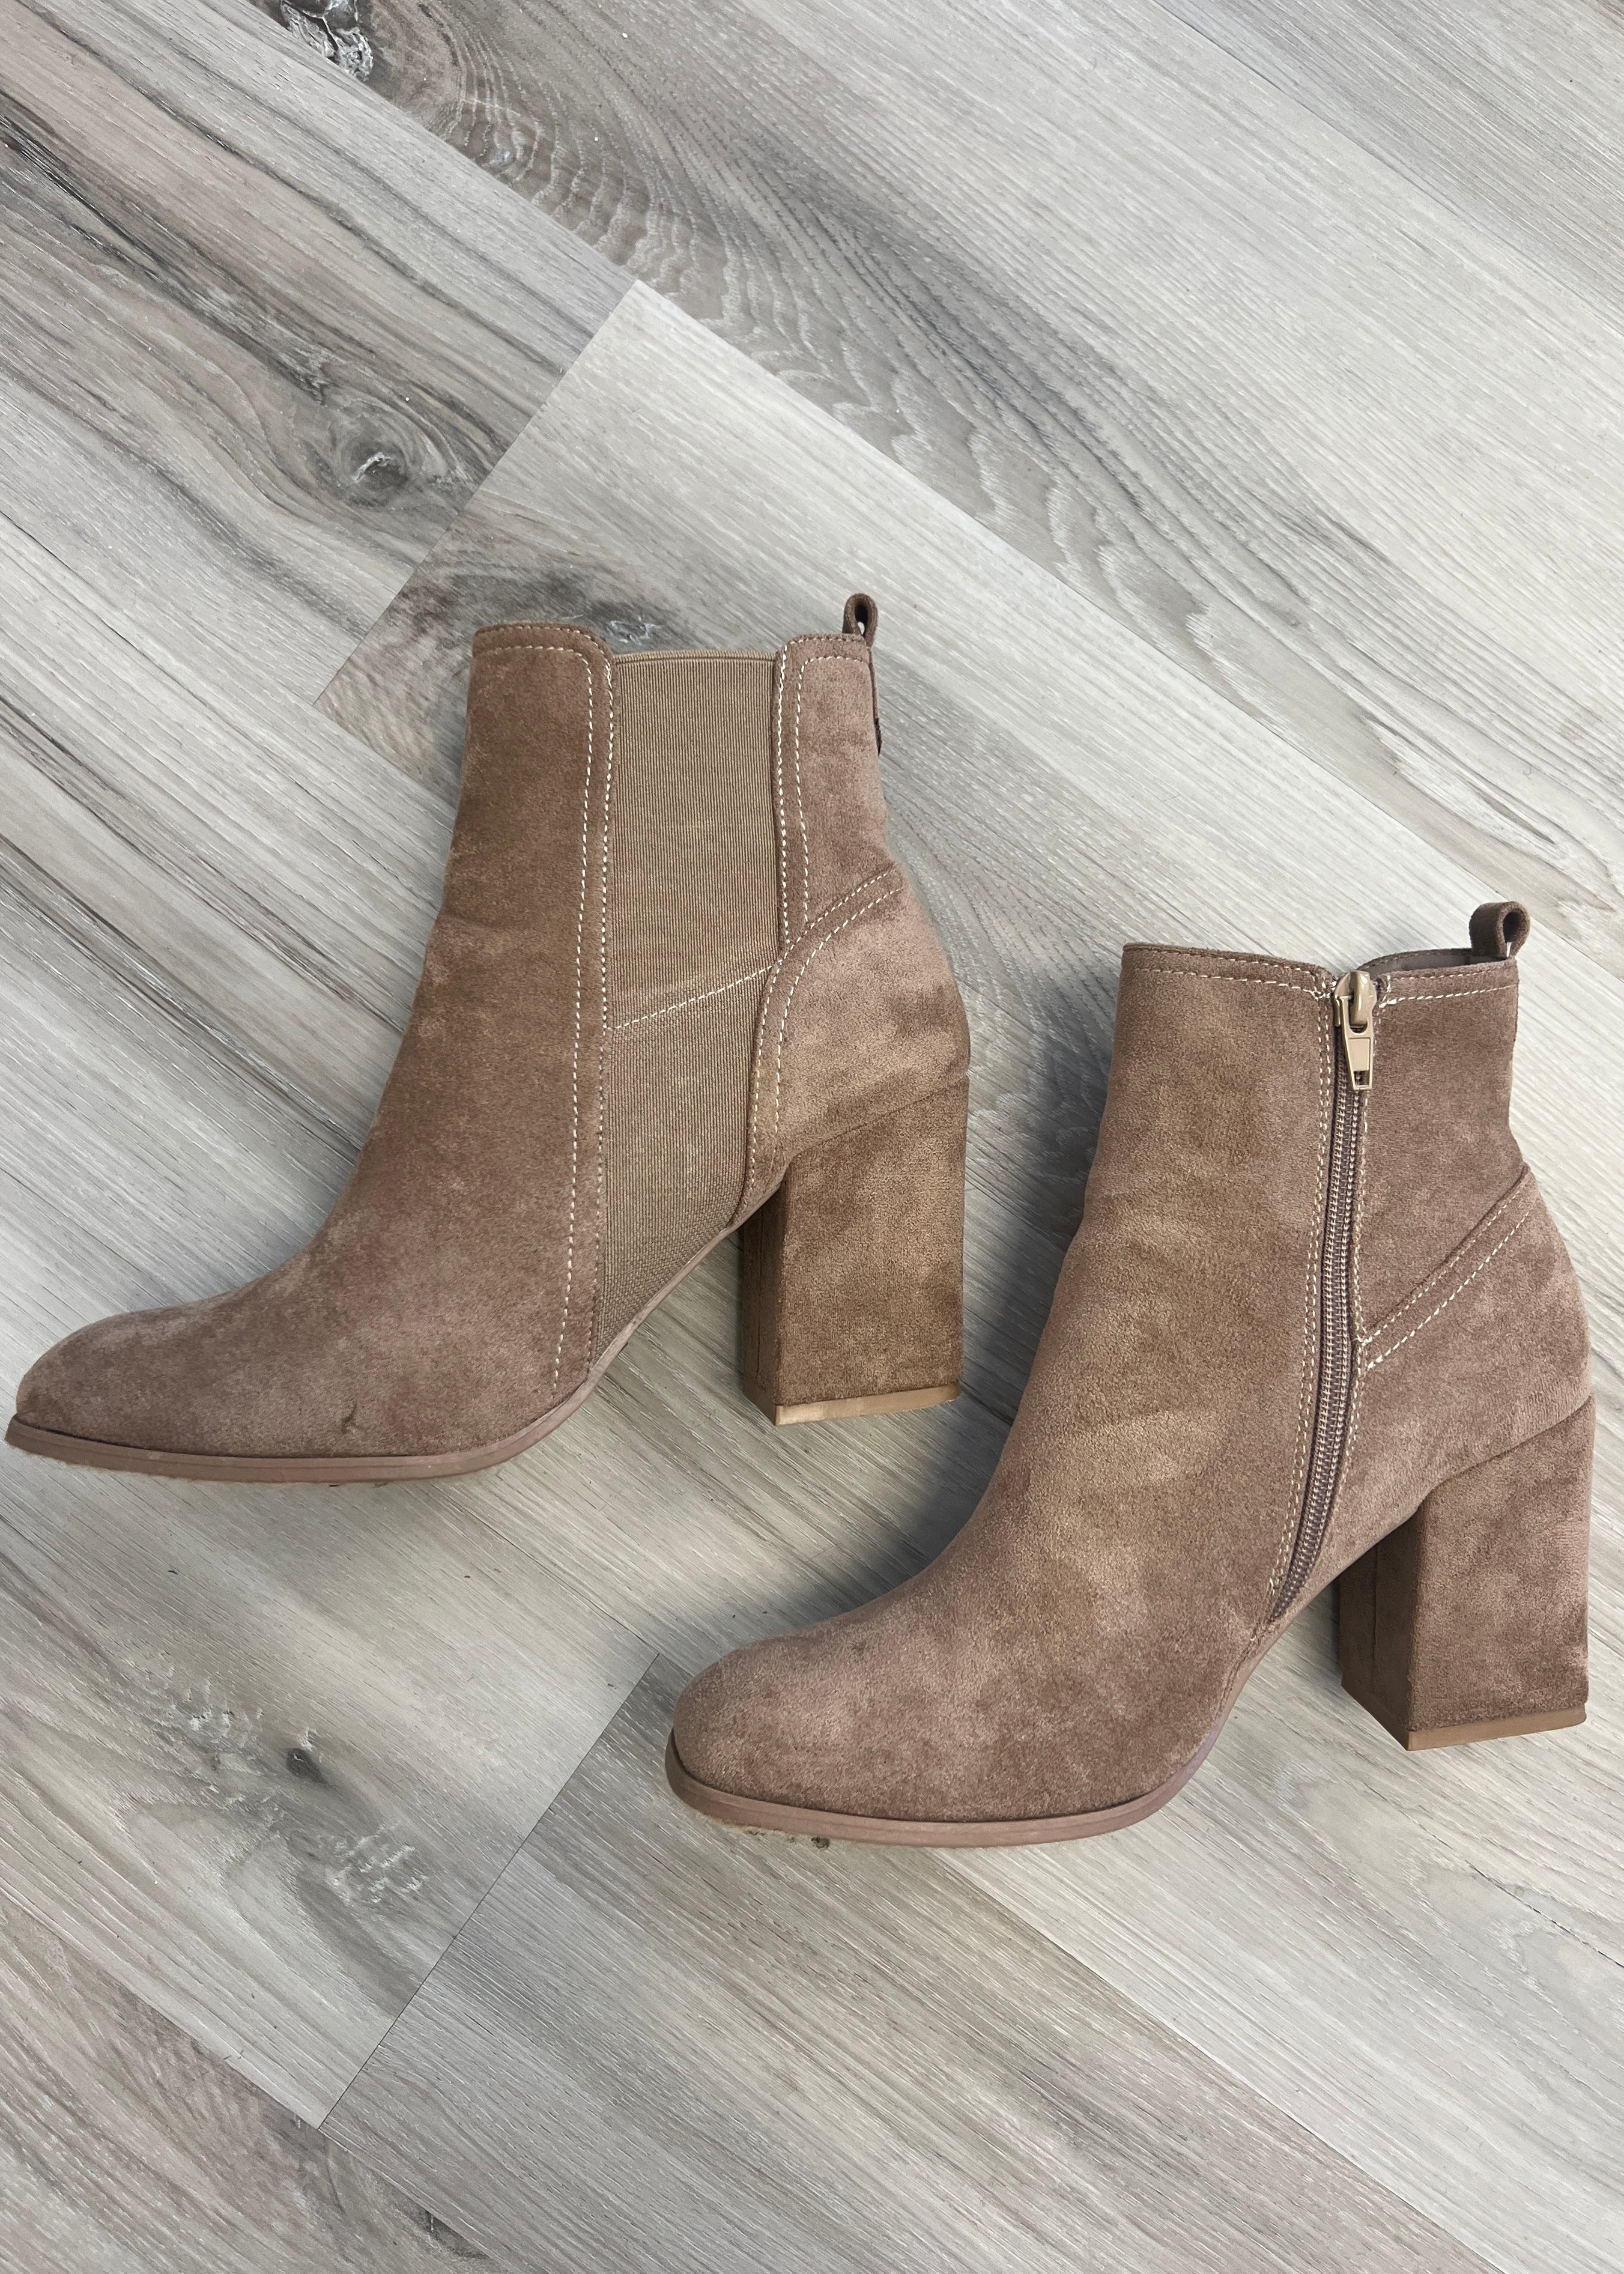 Shania Taupe Suede Boots-Shop-Womens-Boutique-Clothing